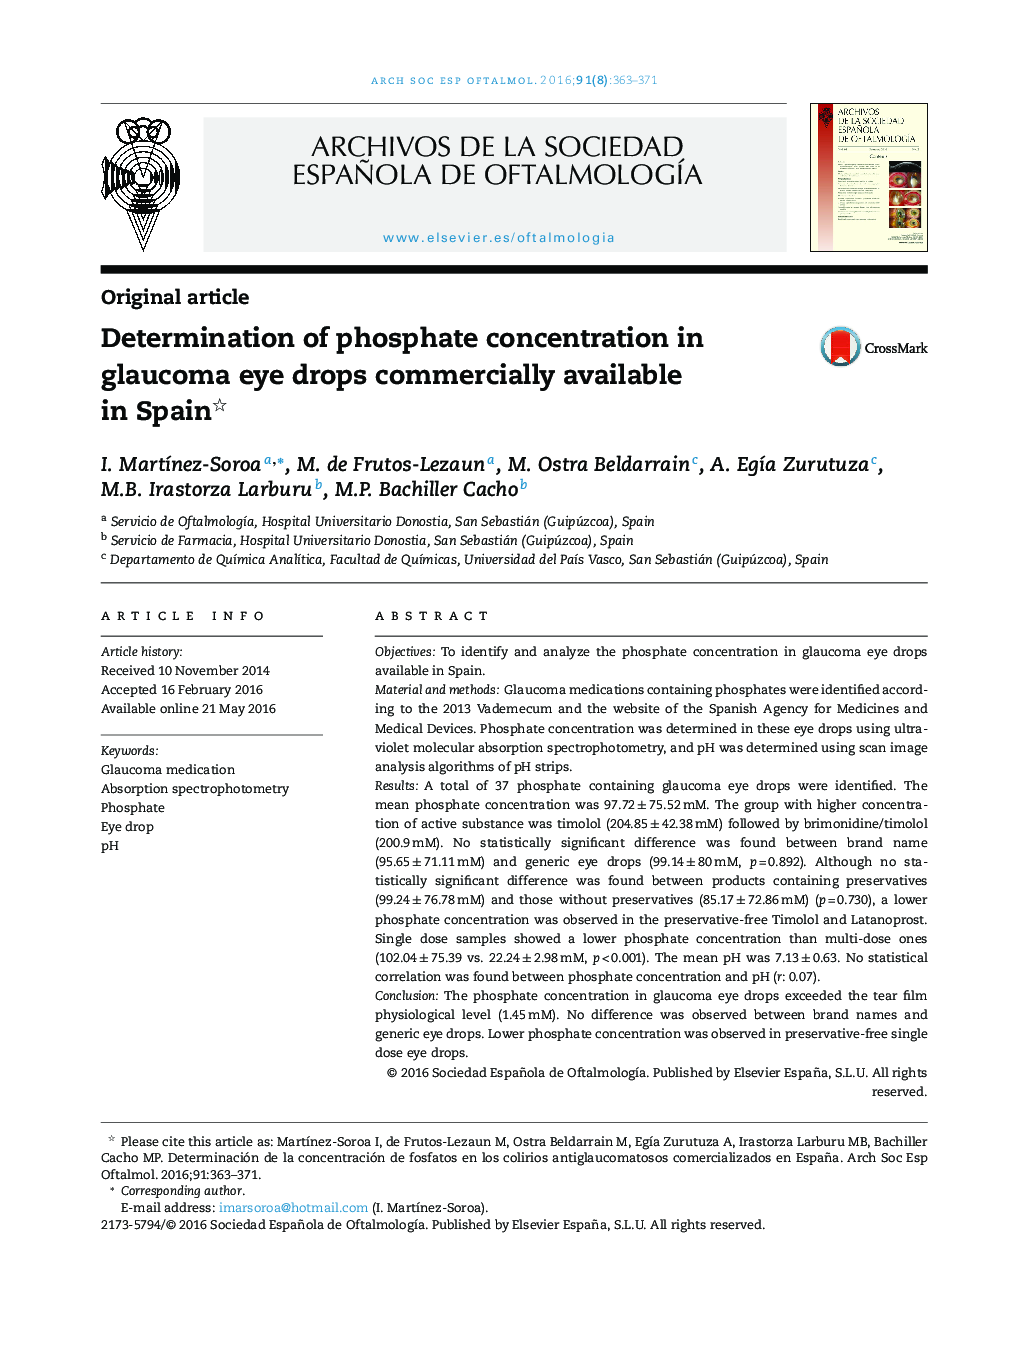 Determination of phosphate concentration in glaucoma eye drops commercially available in Spain 